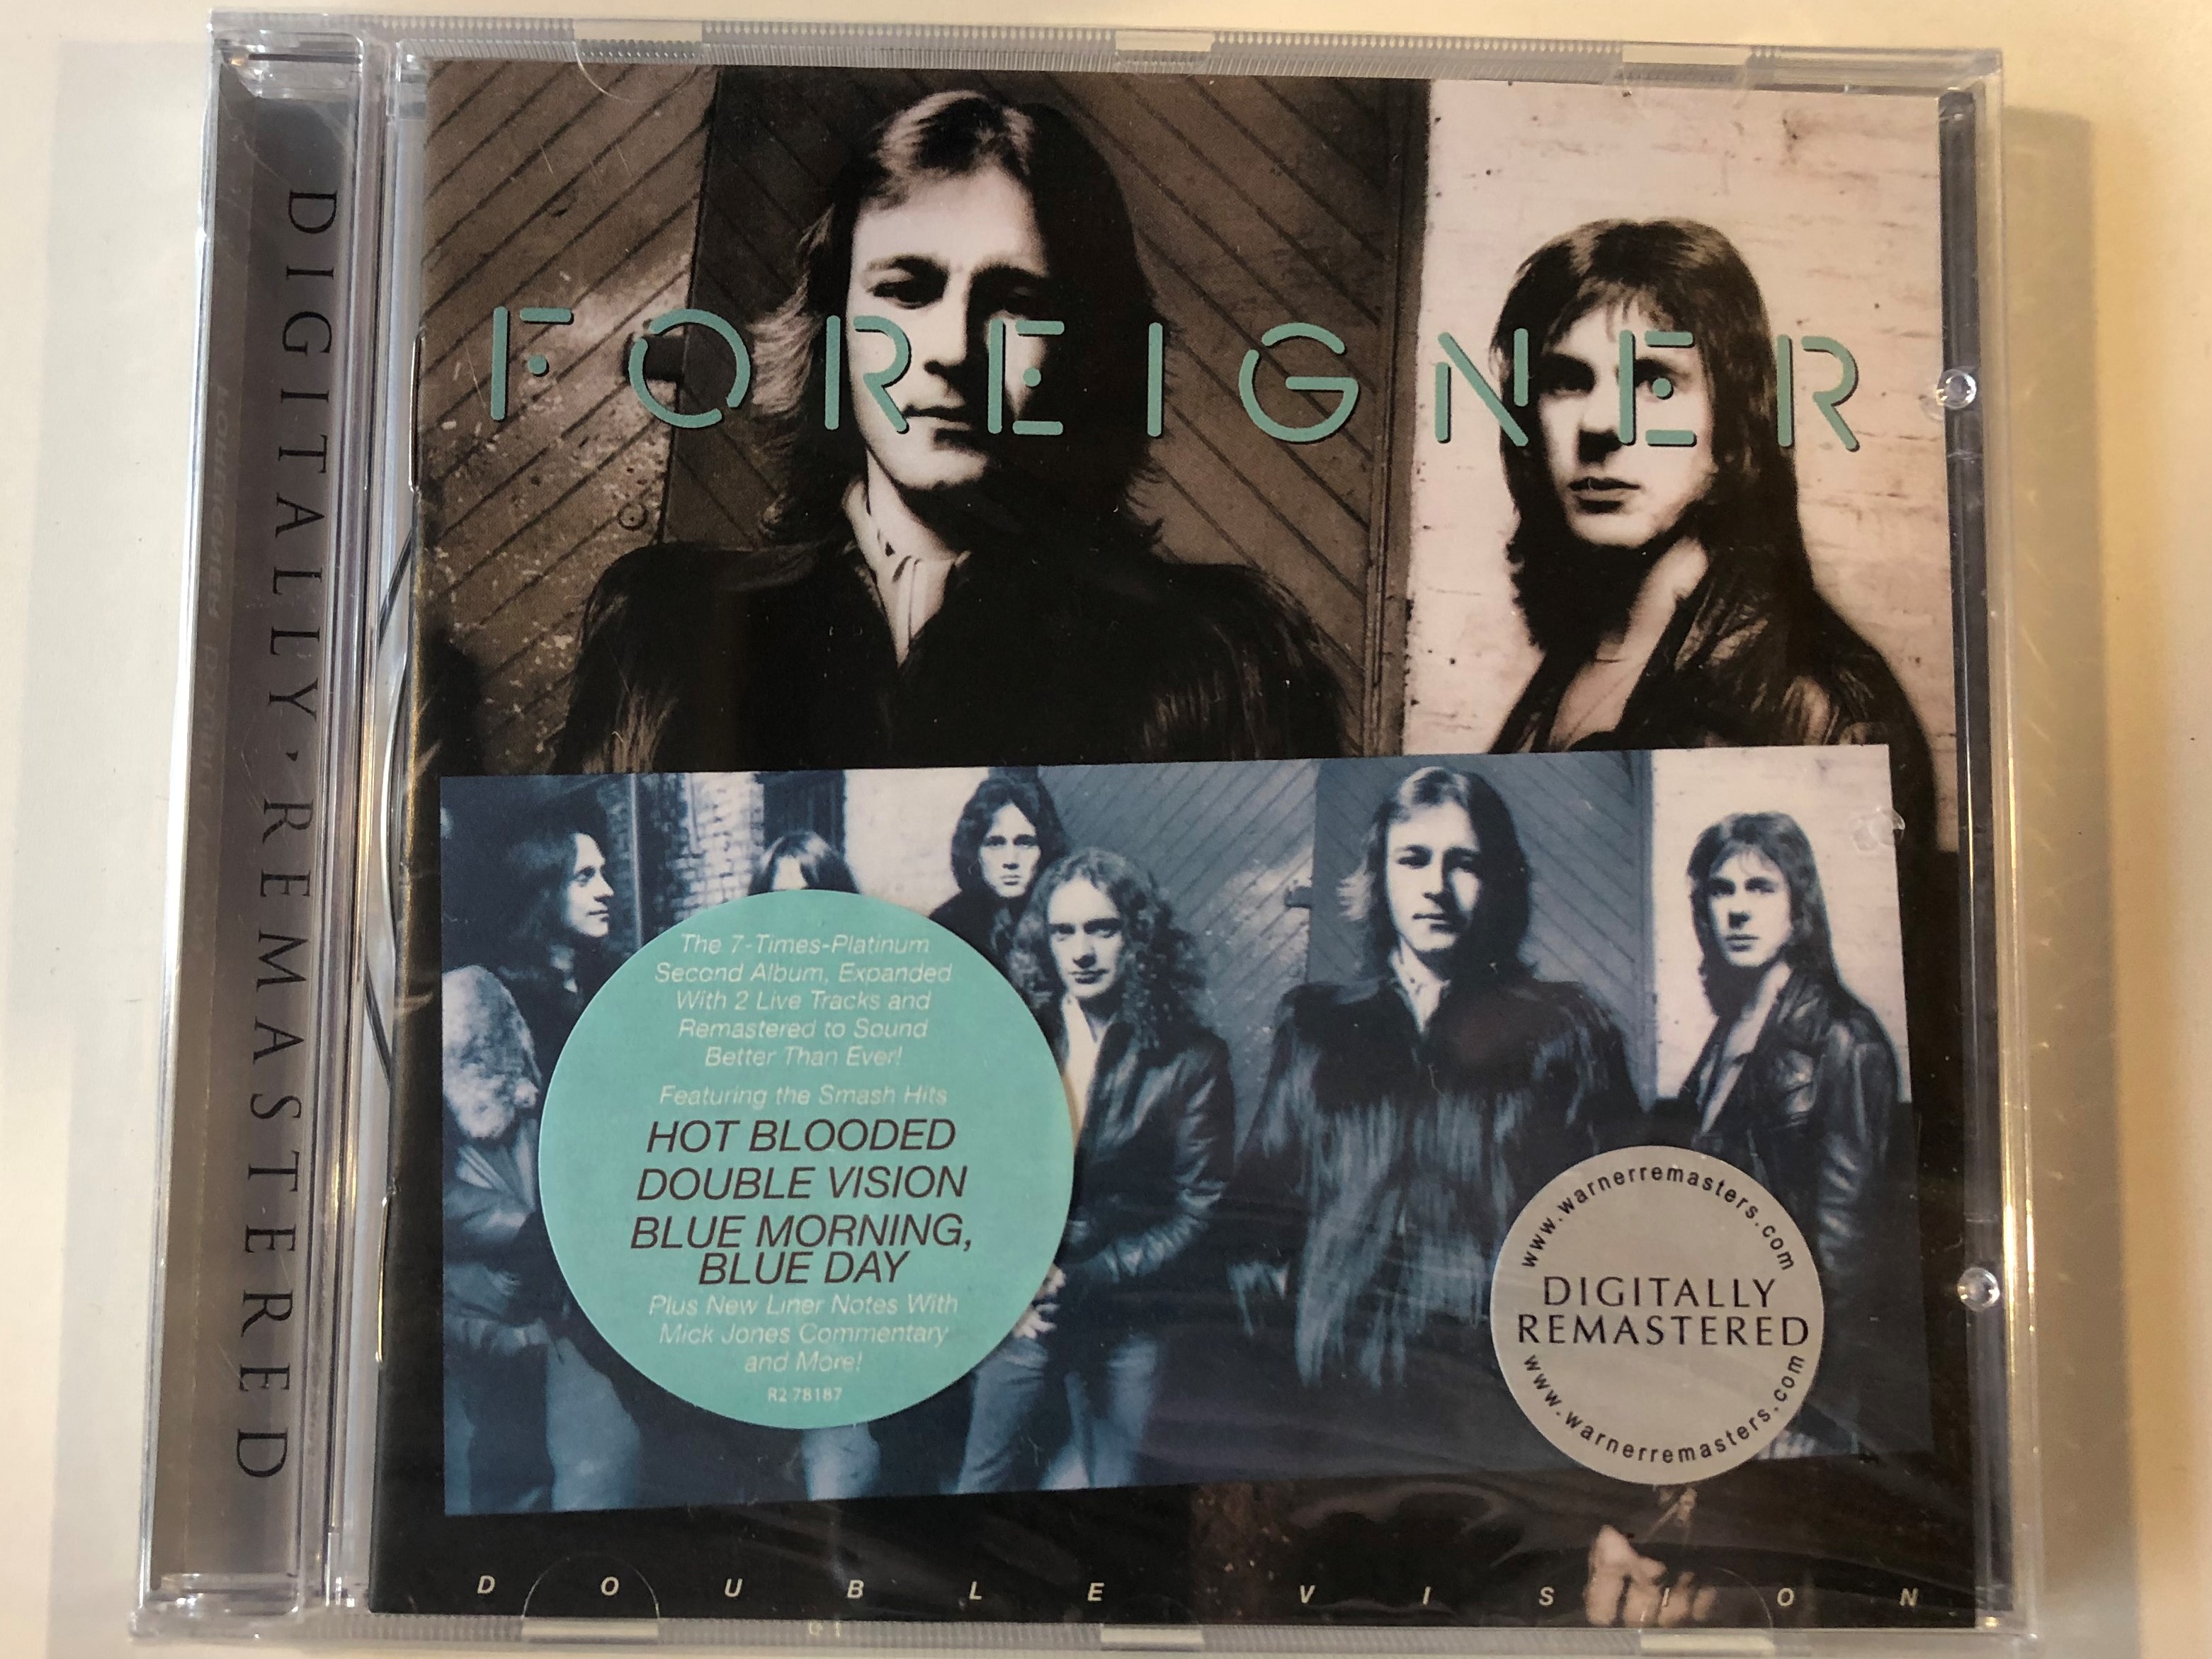 foreigner-double-vision-featuring-the-smash-hits-hot-blooded-double-vision-blue-morning-blue-day-...-atlantic-audio-cd-2002-08122-78187-22-1-.jpg